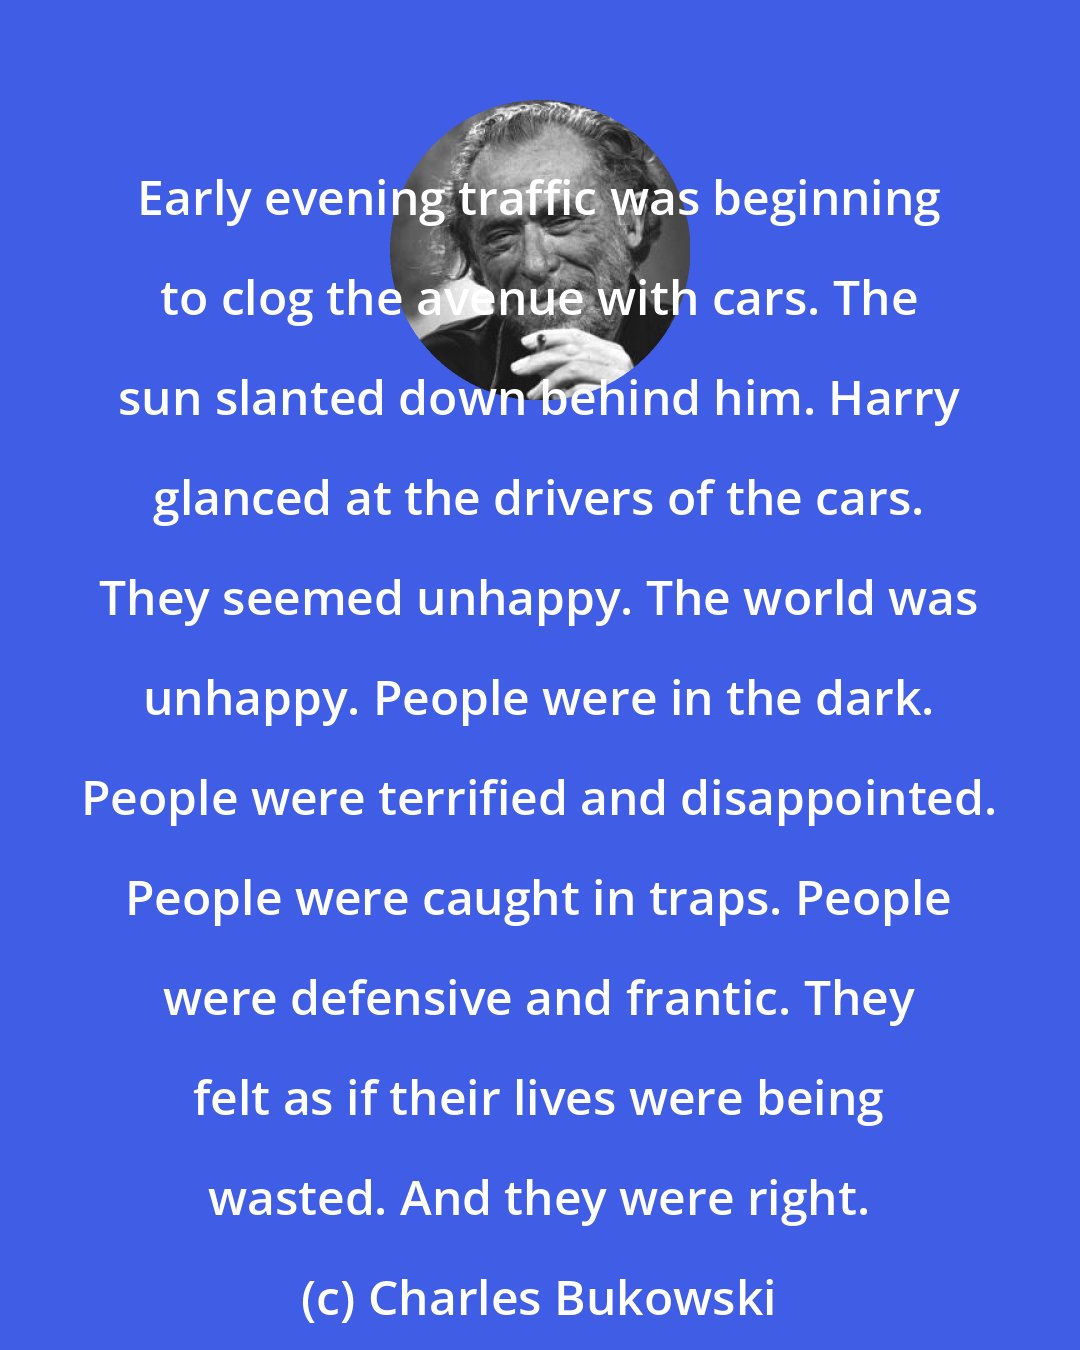 Charles Bukowski: Early evening traffic was beginning to clog the avenue with cars. The sun slanted down behind him. Harry glanced at the drivers of the cars. They seemed unhappy. The world was unhappy. People were in the dark. People were terrified and disappointed. People were caught in traps. People were defensive and frantic. They felt as if their lives were being wasted. And they were right.